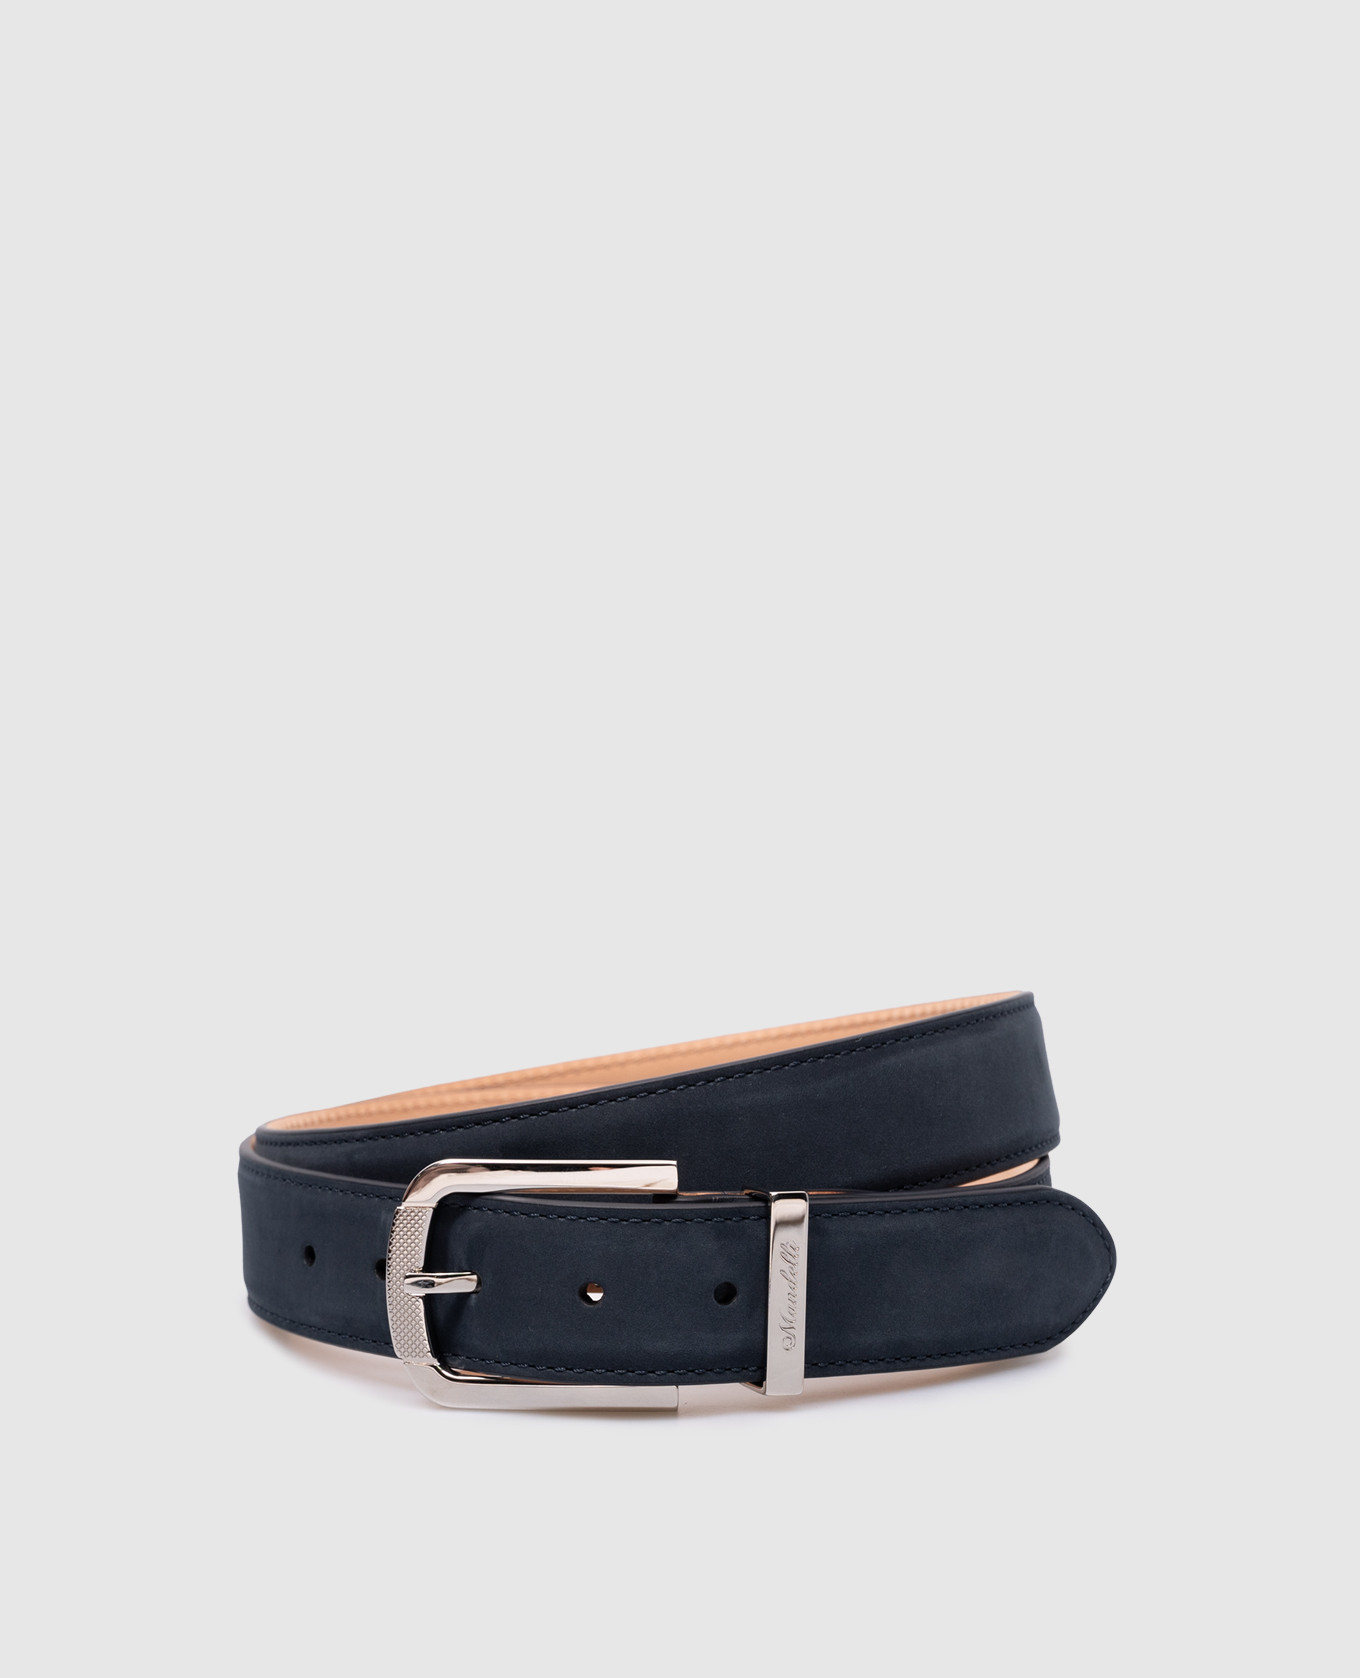 Blue suede belt with logo engraving